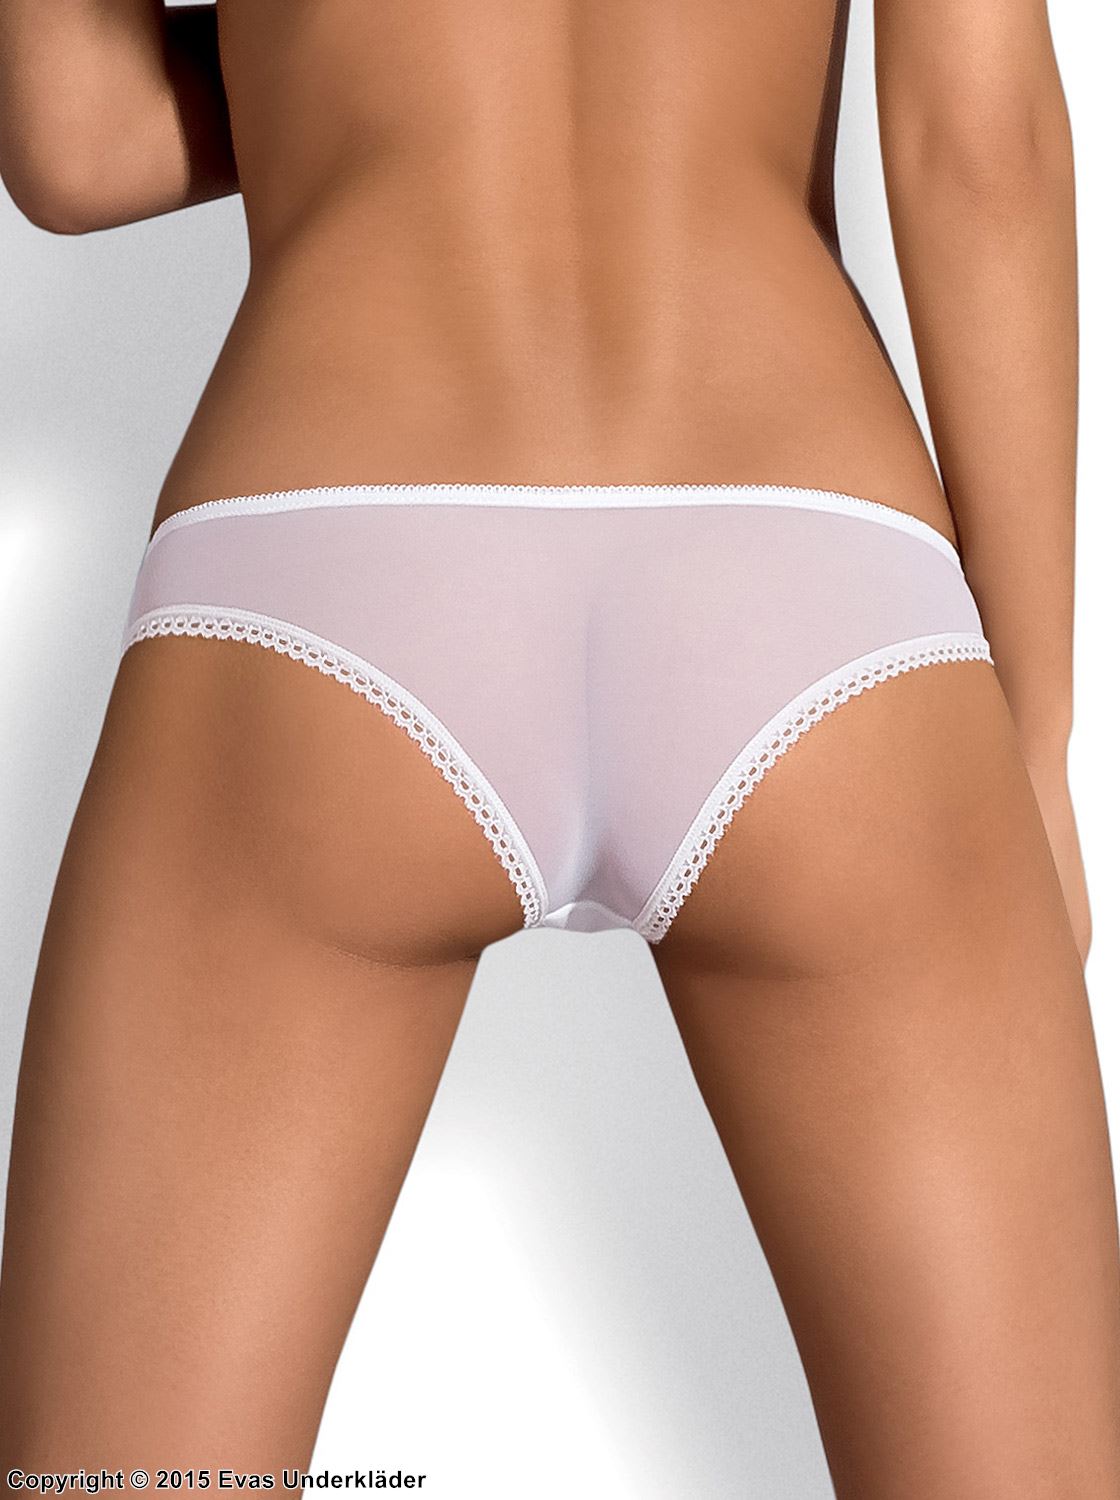 Sheer panty with cute lace details